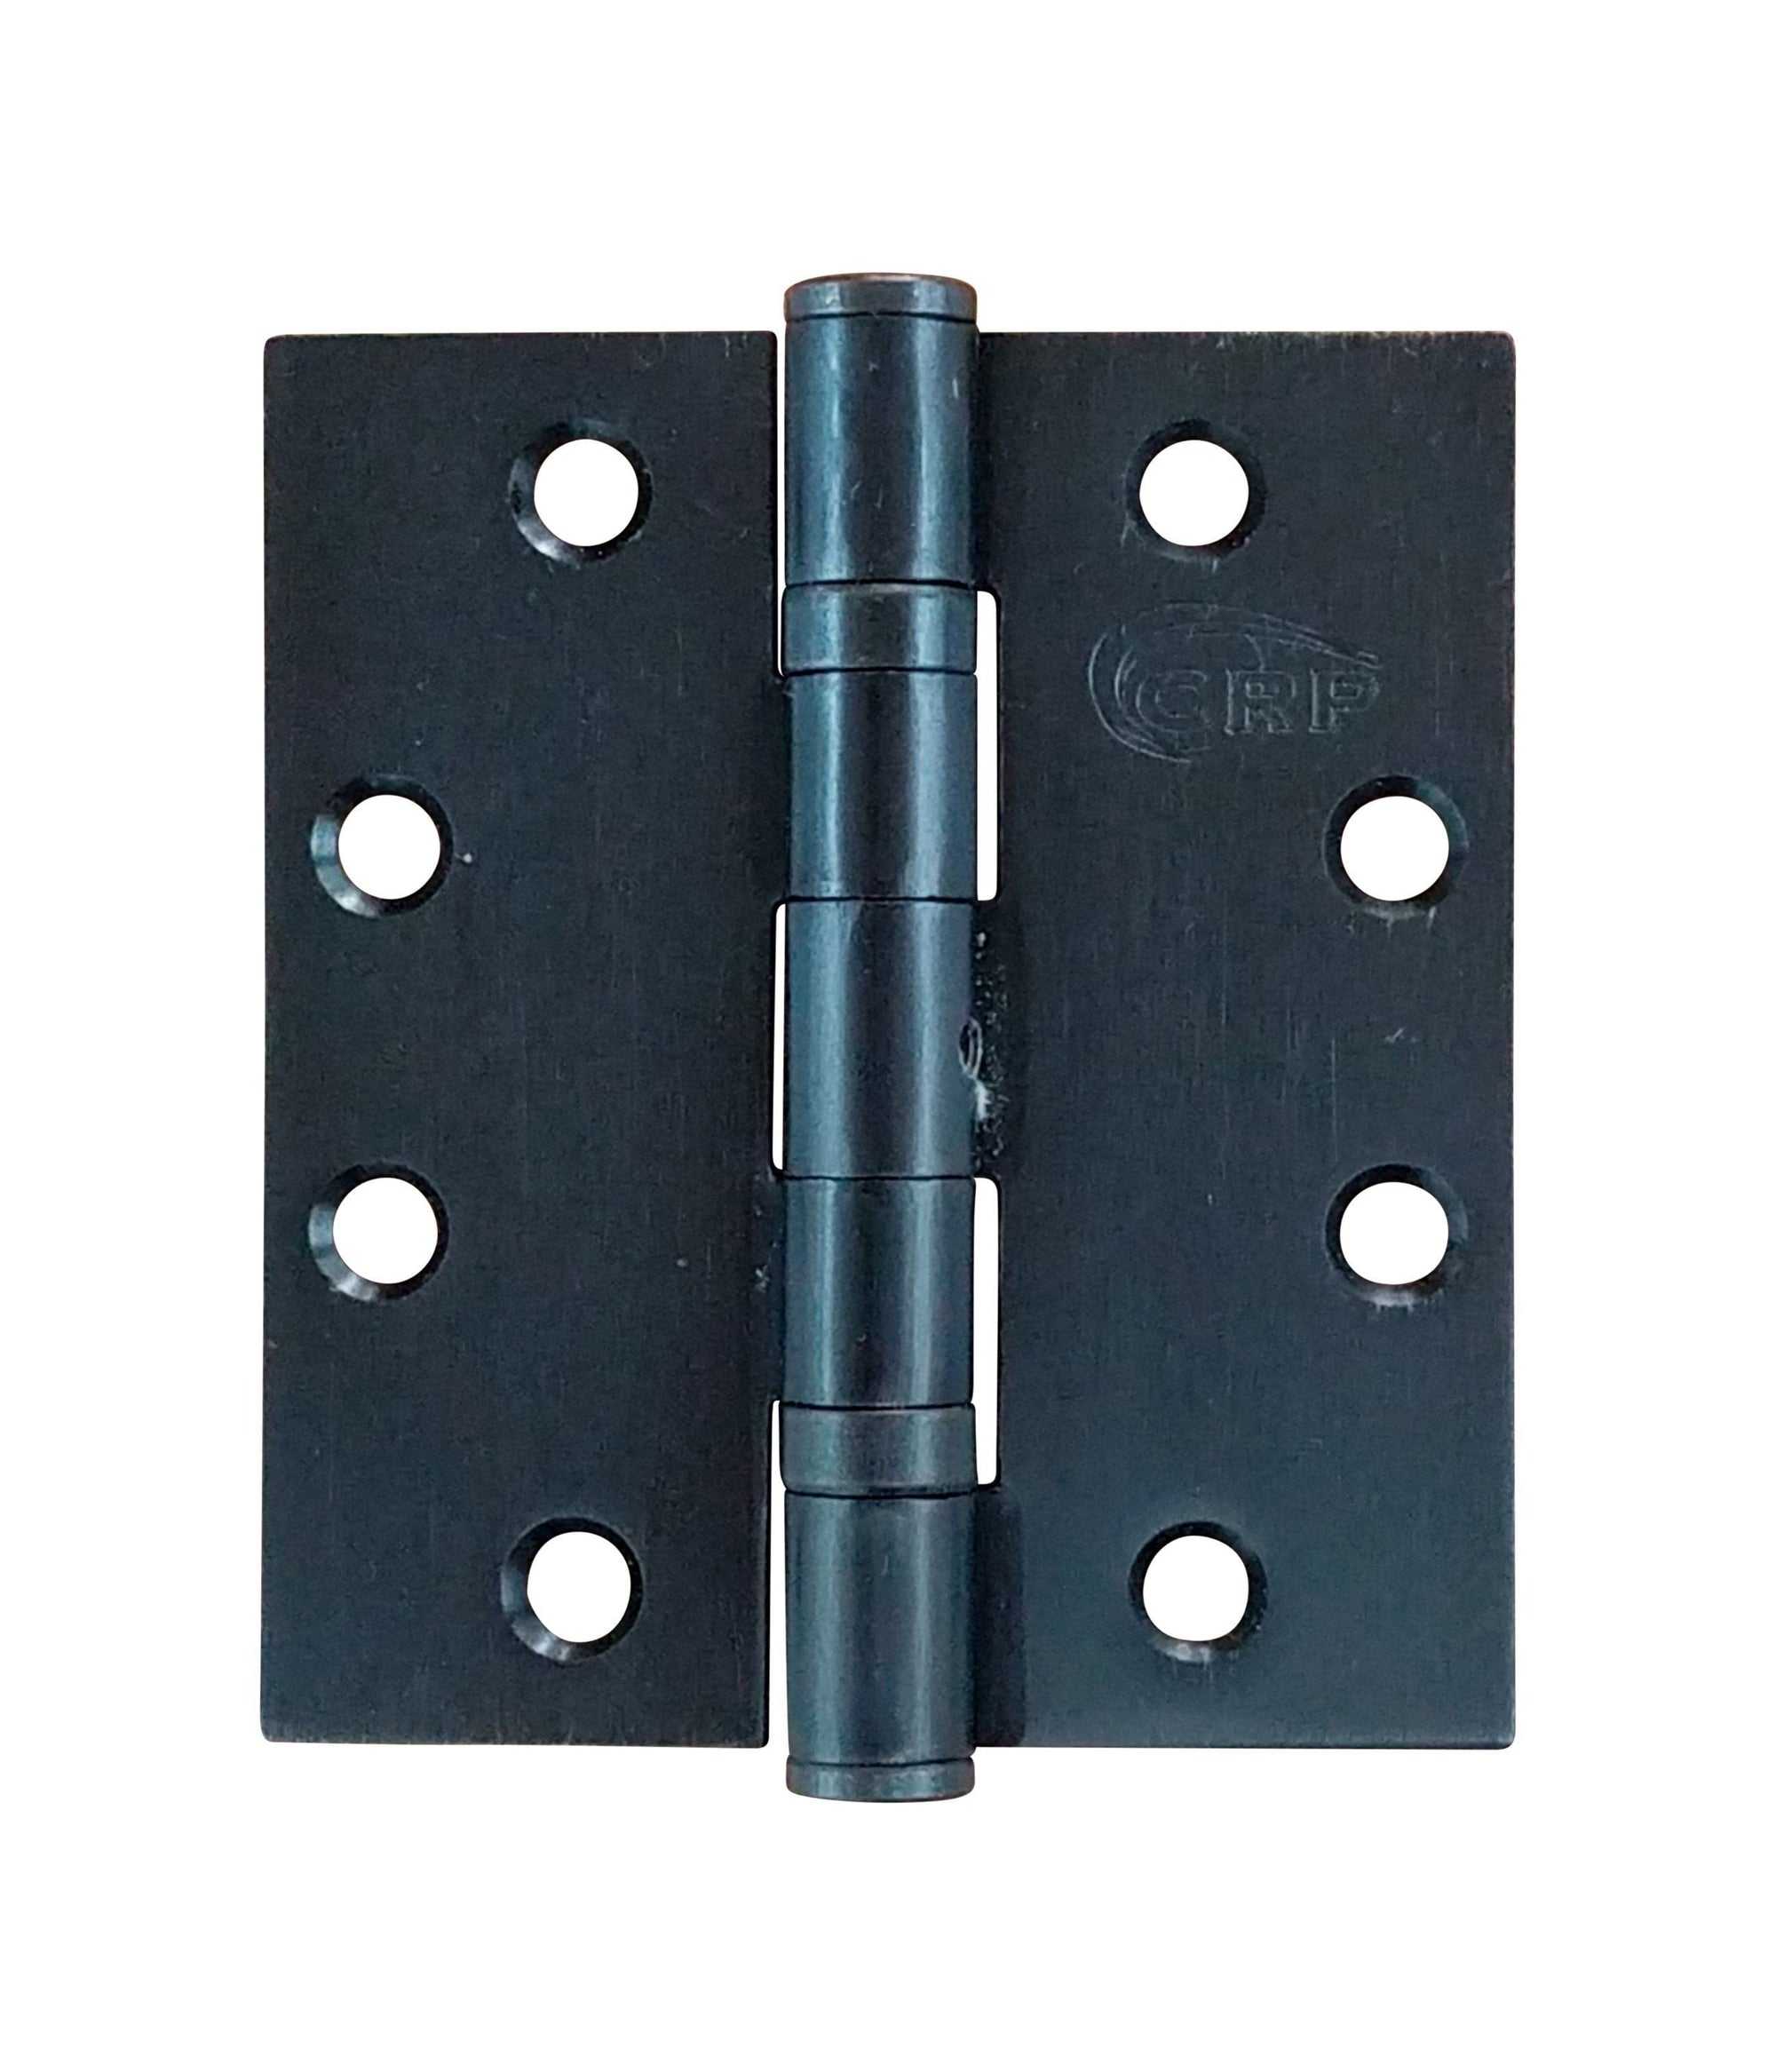 Commercial Ball Bearing Hinges - Heavy Duty Commercial Ball Bearing Door Hinges - 4.5" Inch X 4" Inch - Black - Non Removable Pin - 2 Pack